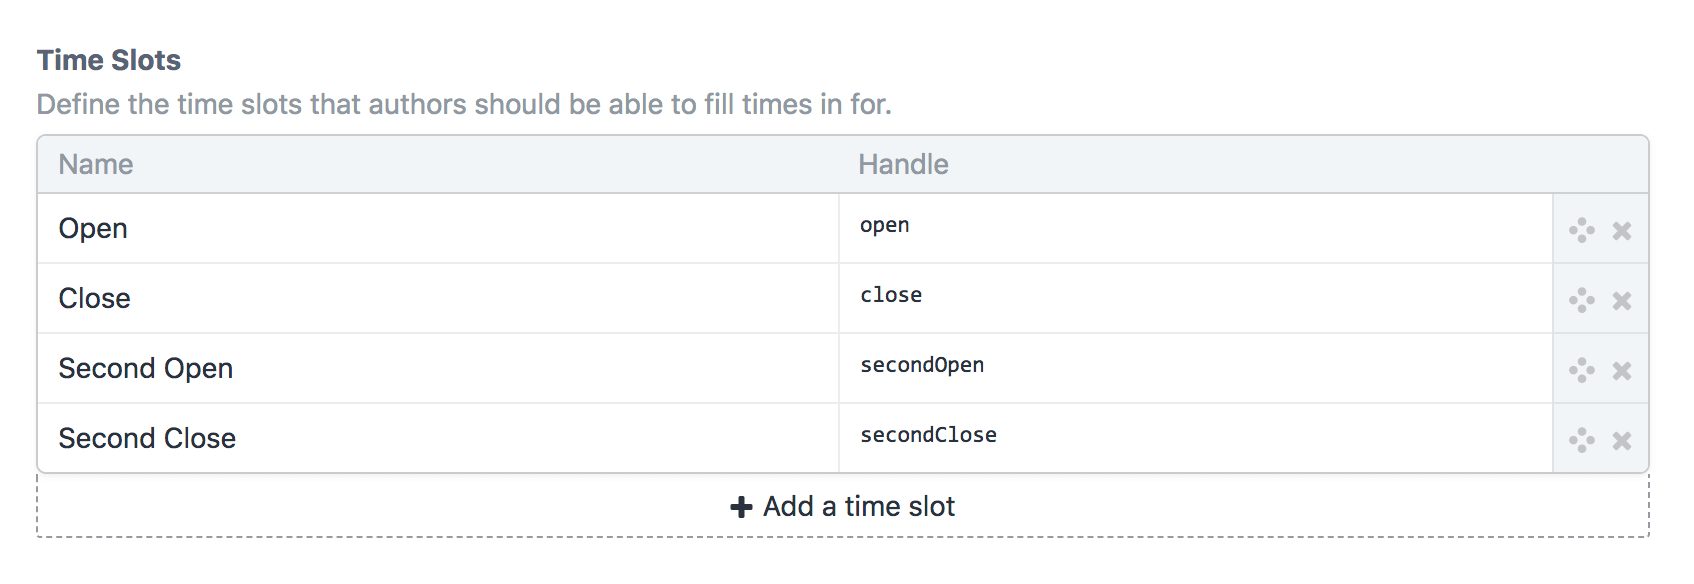 A Time Slots field setting with “Open”, “Close”, “Second Open”, and “Second Close” slots defined